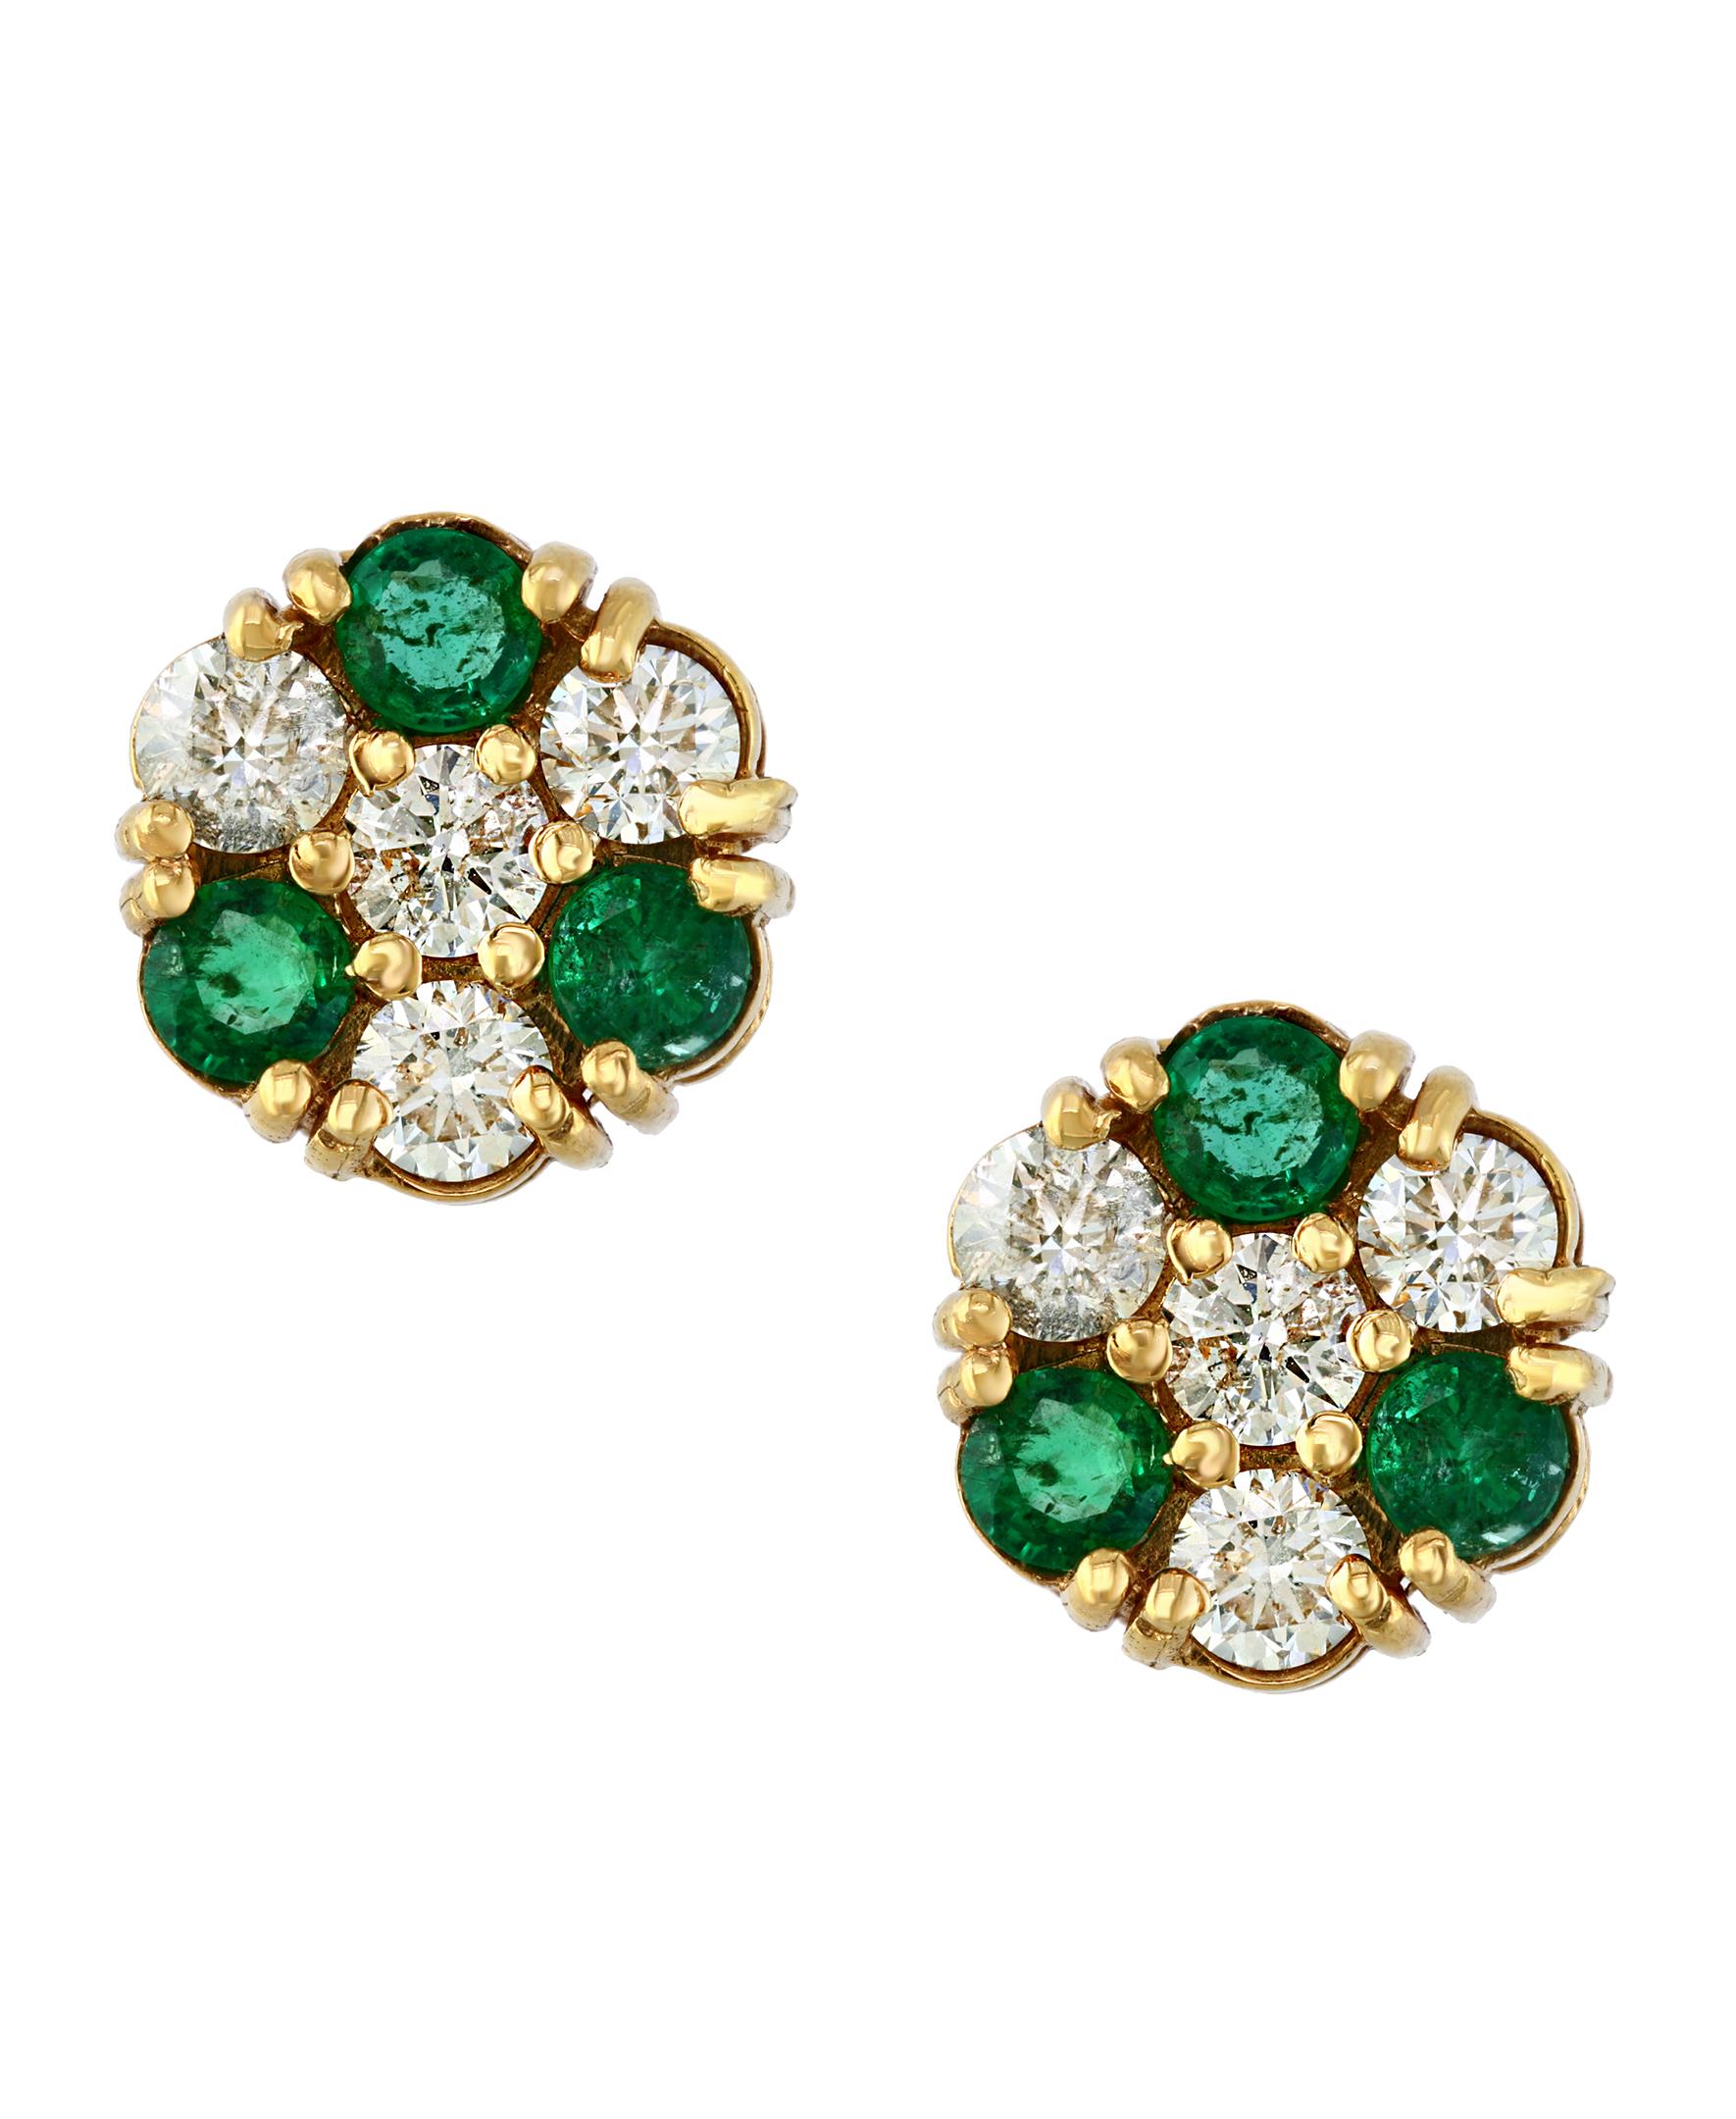 
1.5 Carat  Round Cut Emerald  perfect pair  Post  Earrings  14 Karat  Yellow Gold 
This exquisite pair of earrings are beautifully crafted with 14 karat  Yellow gold .
Weight of 14 K gold 5.3 grams
 Fine  6 Round Cut Emeralds weighing approximately